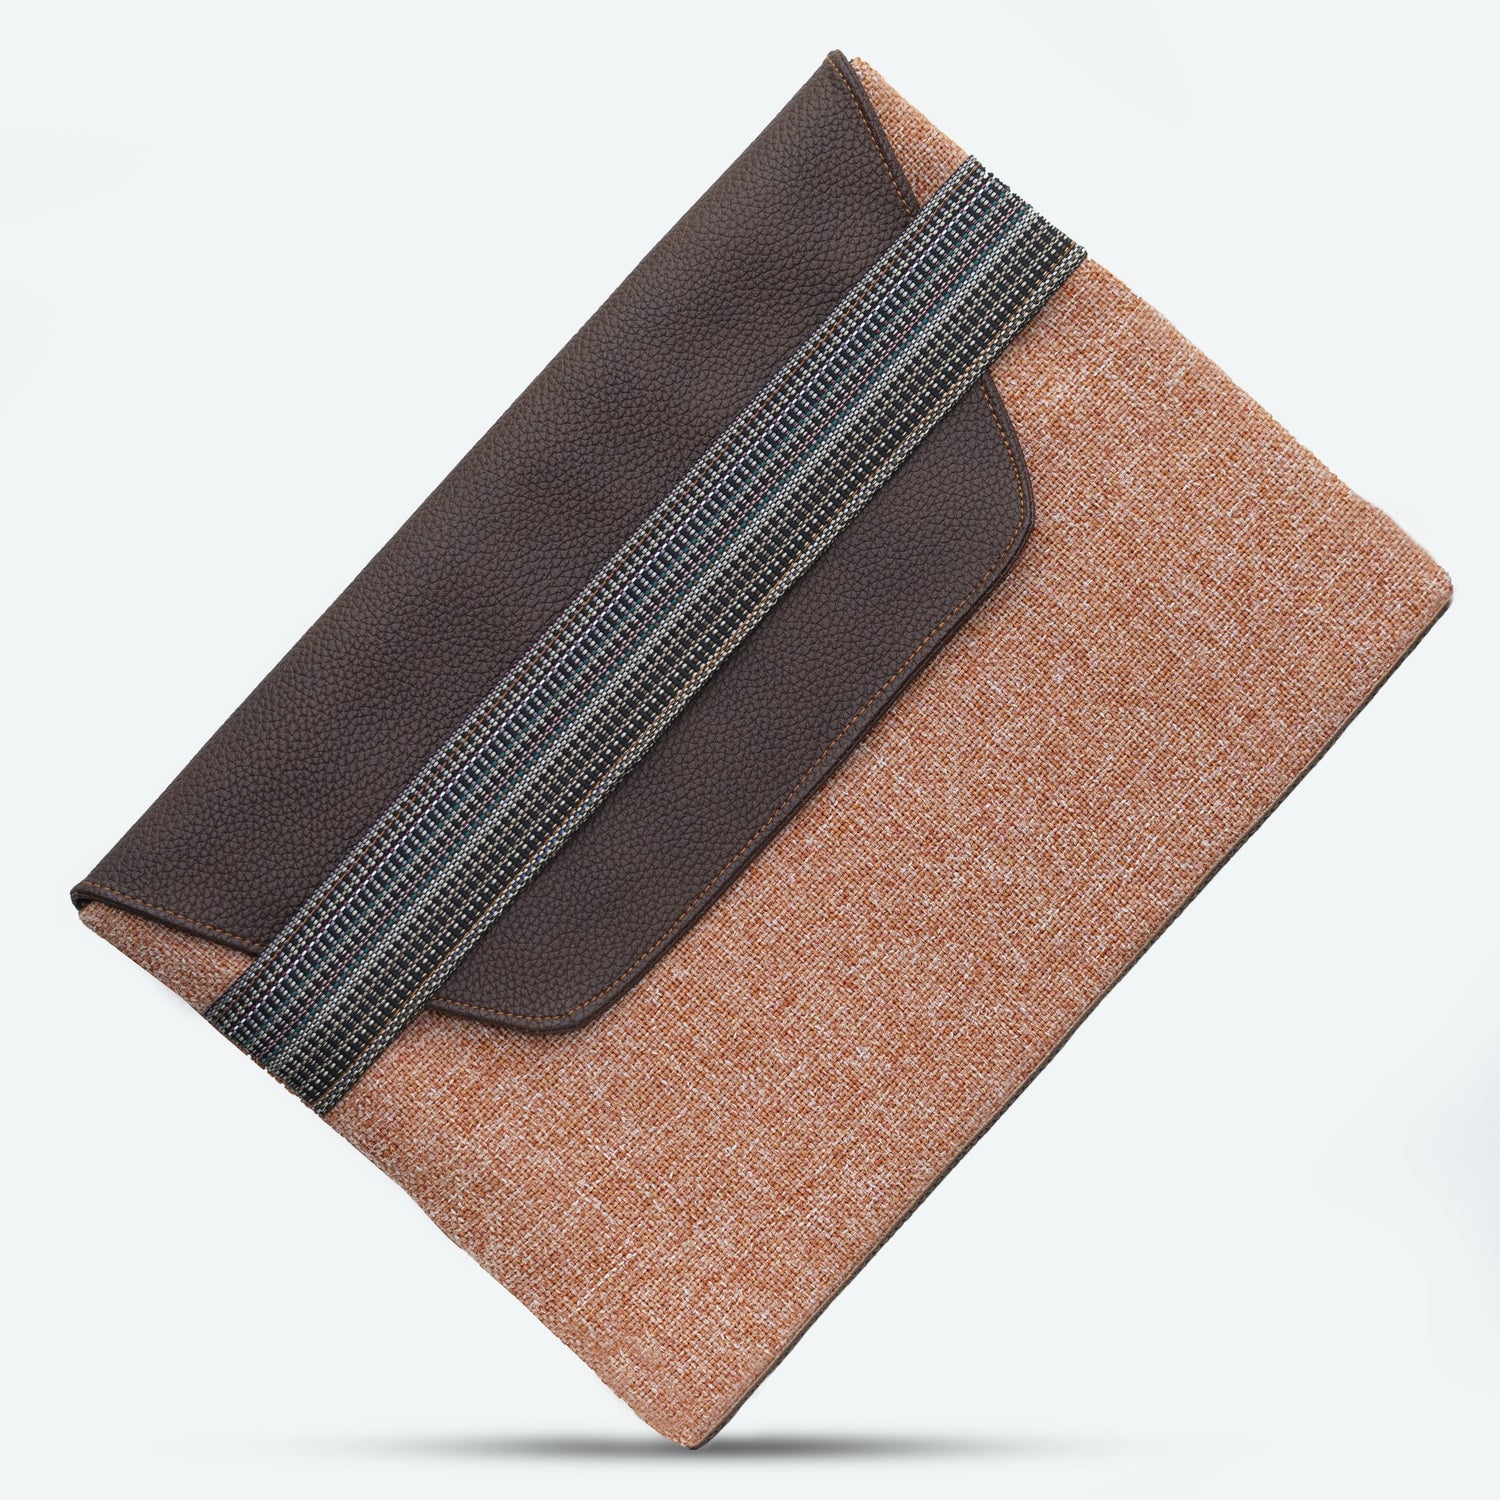 Pouch in shades of brown, leather and fabric